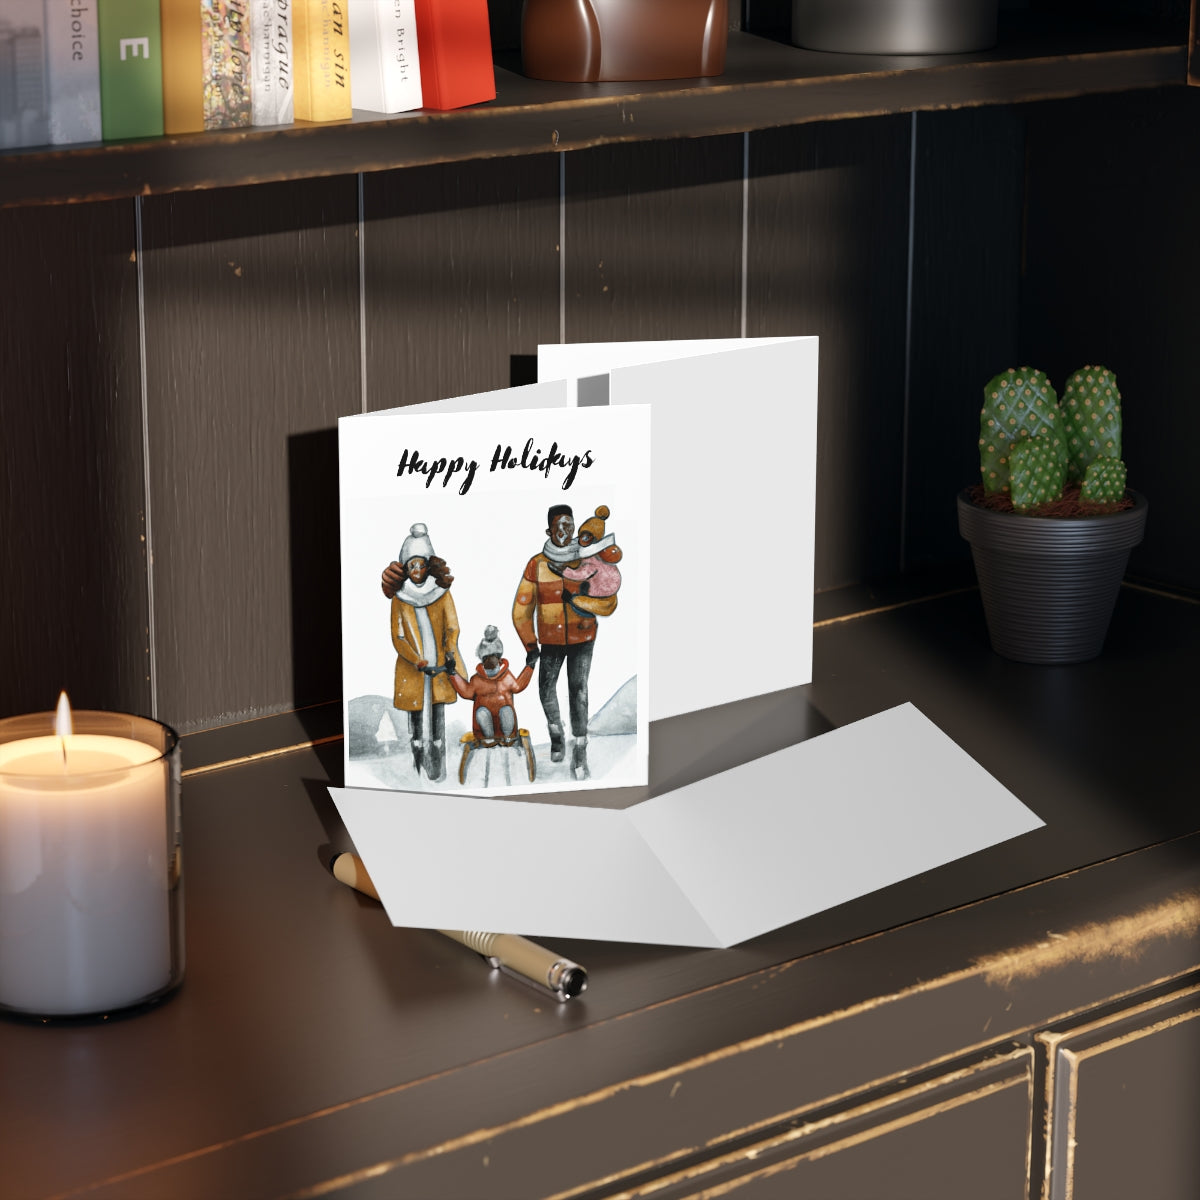 Happy Holidays Greeting cards (8, 16, and 24 pcs)